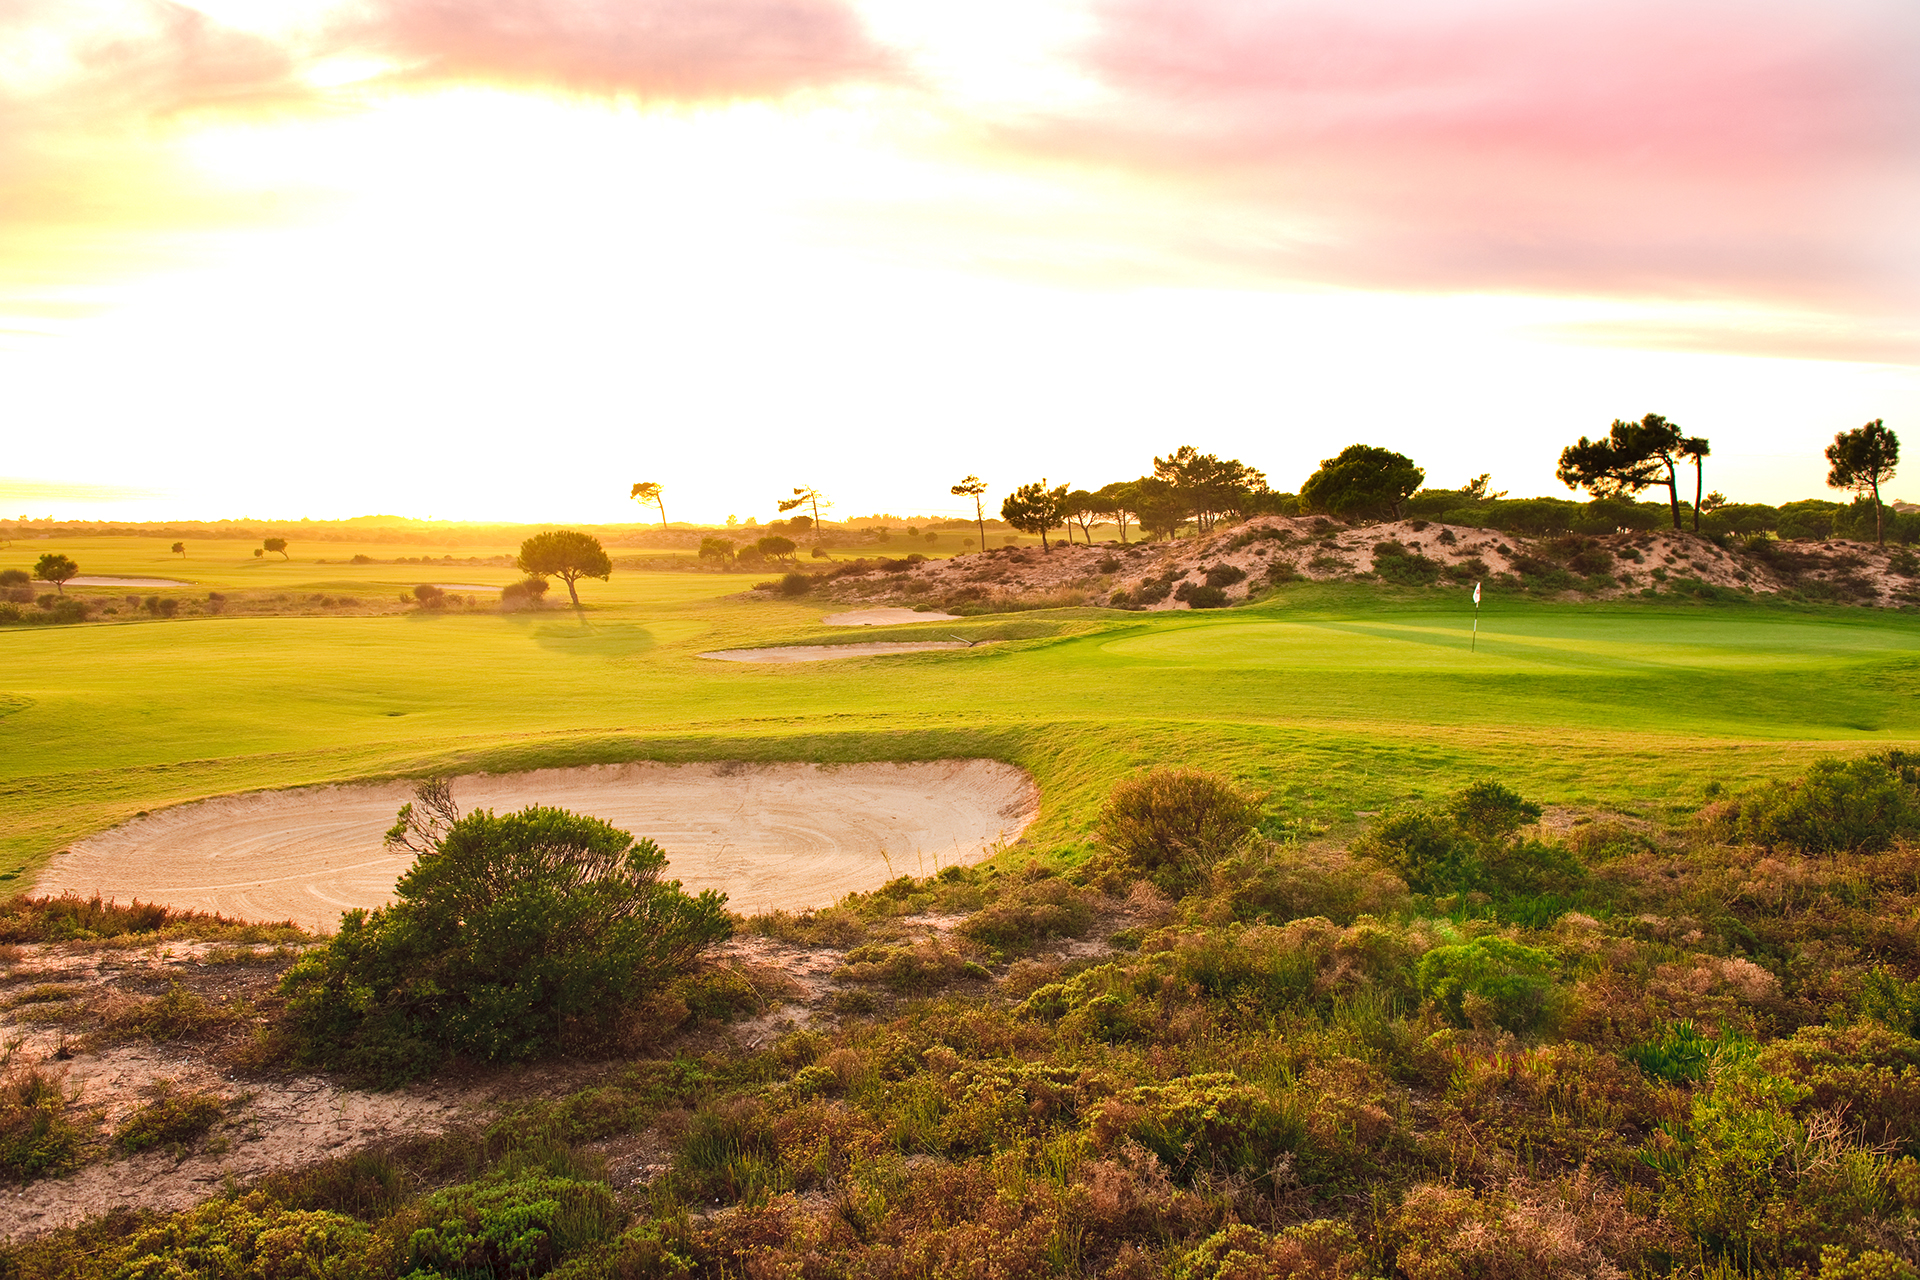 Golf-expedition-golfreizen-golfresort-Royal-The-Oitavos-Hotel-golf-course-hole-7-with-sunset